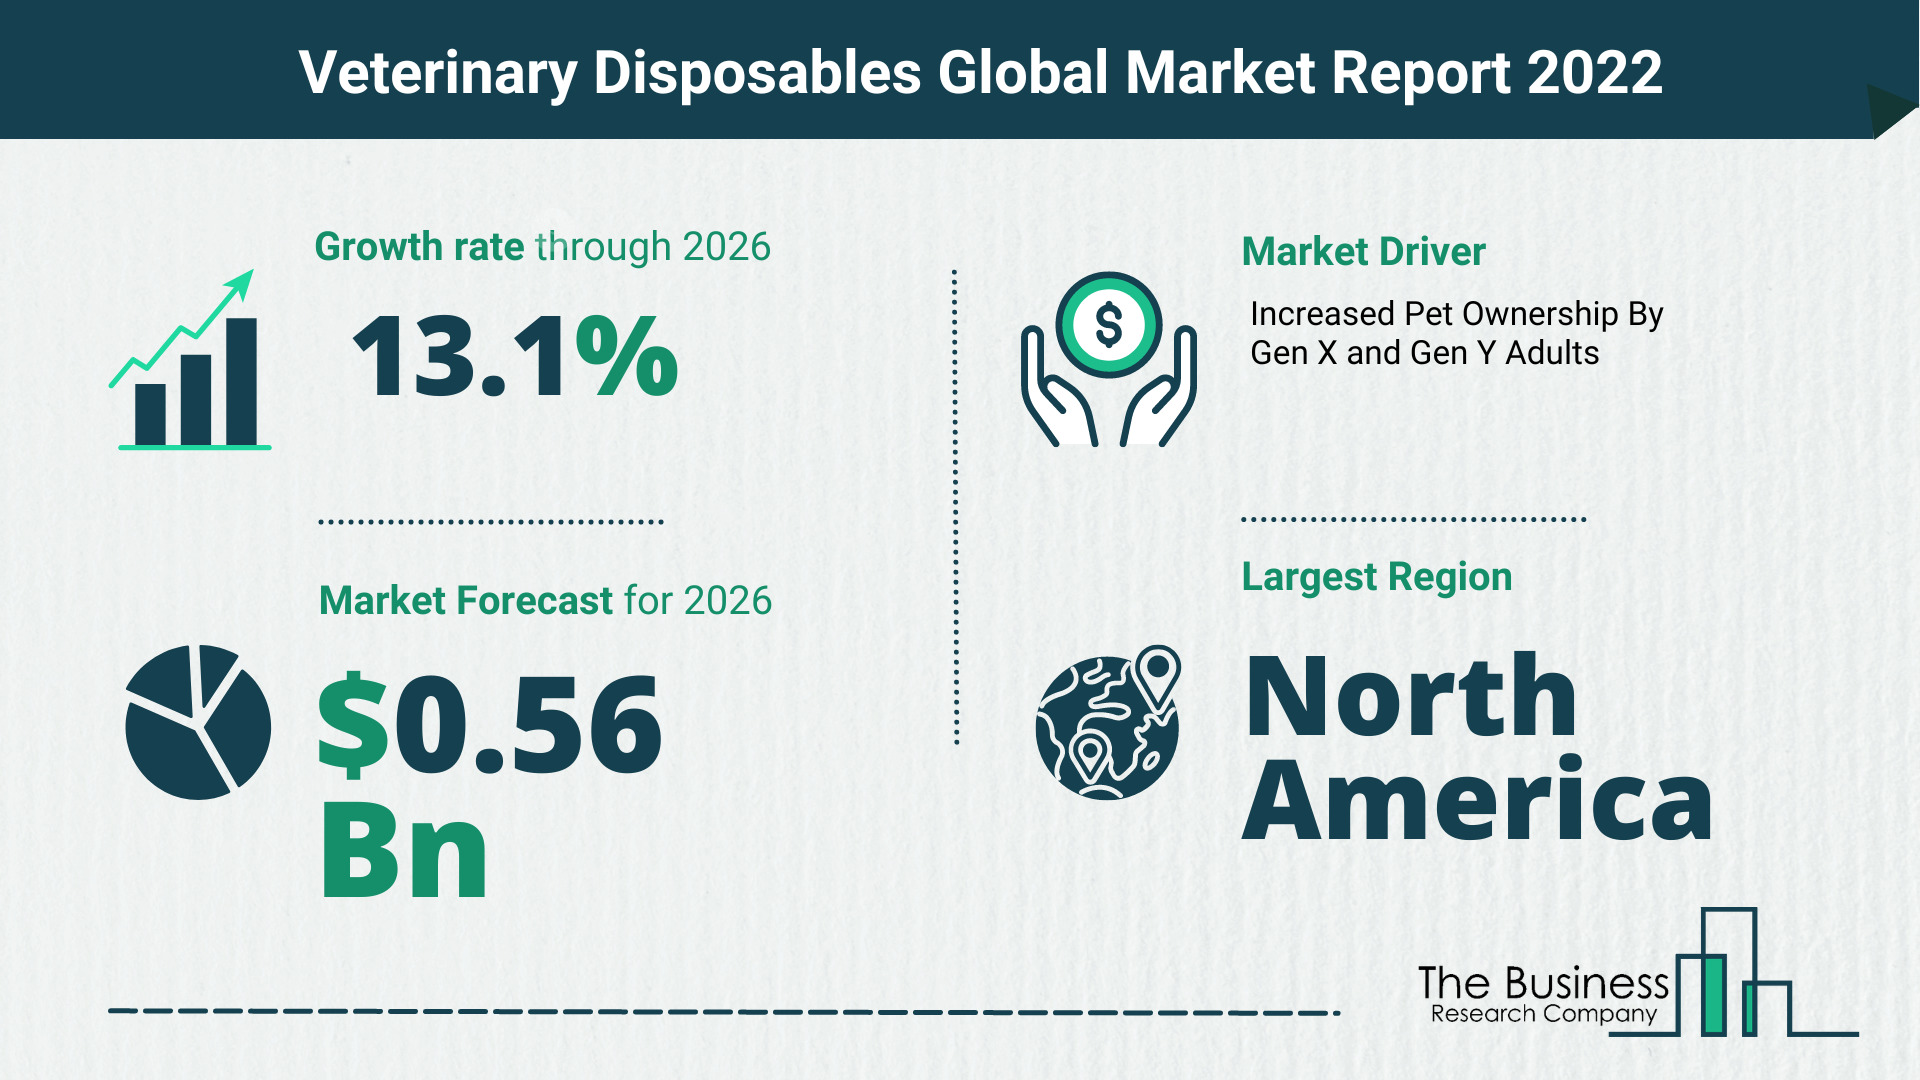 Latest Veterinary Disposables Market Growth Study 2022-2026 By The Business Research Company